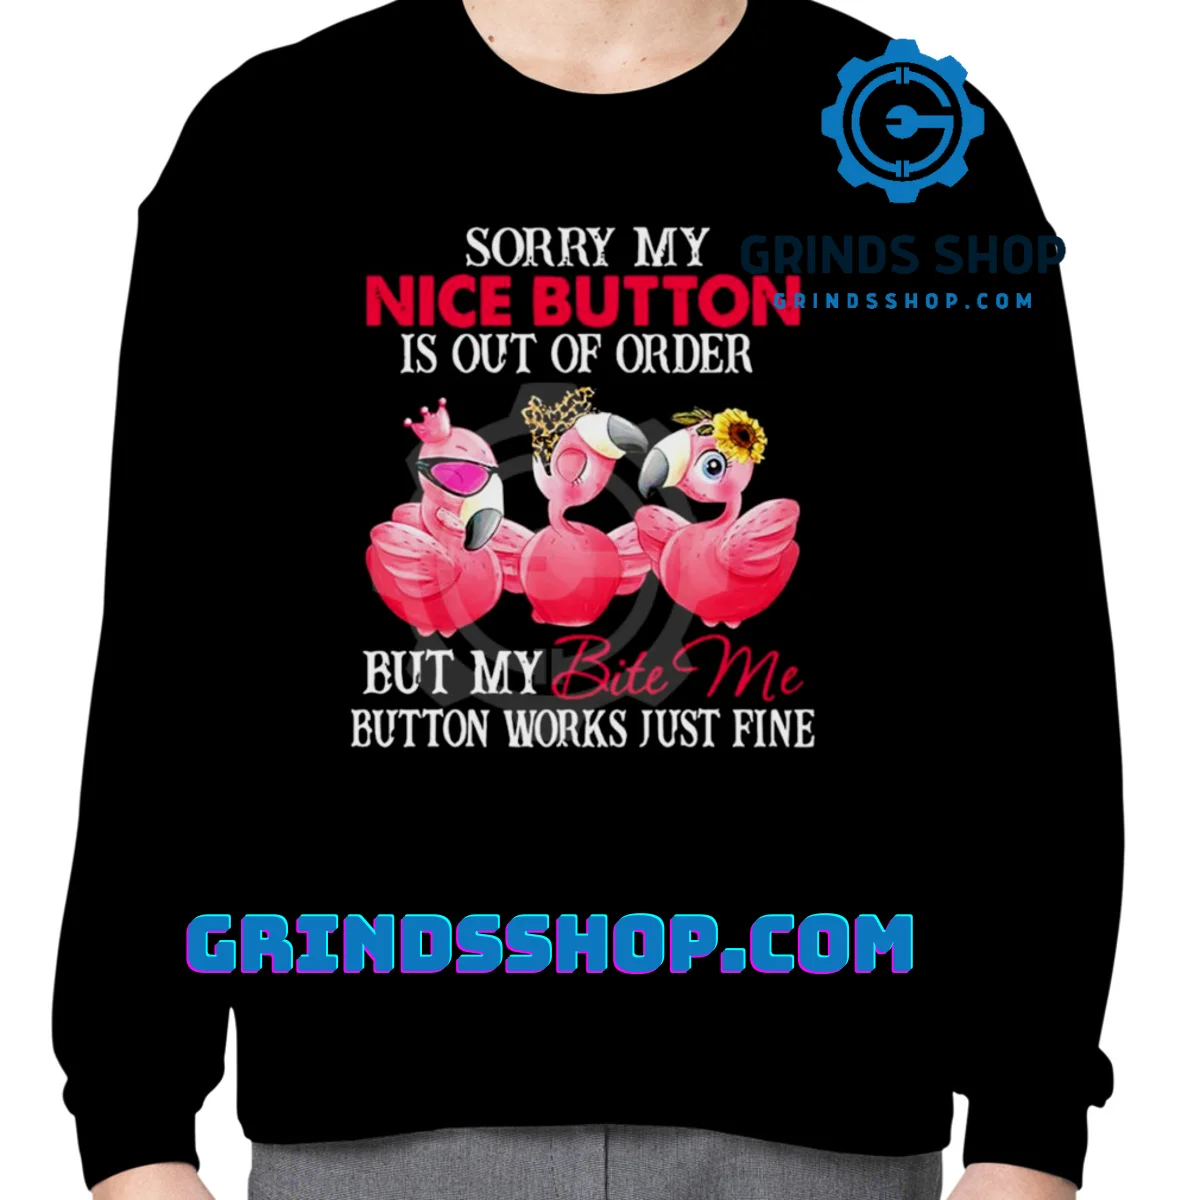 Flamingo sorry my nice button is out order but my bite me shirt